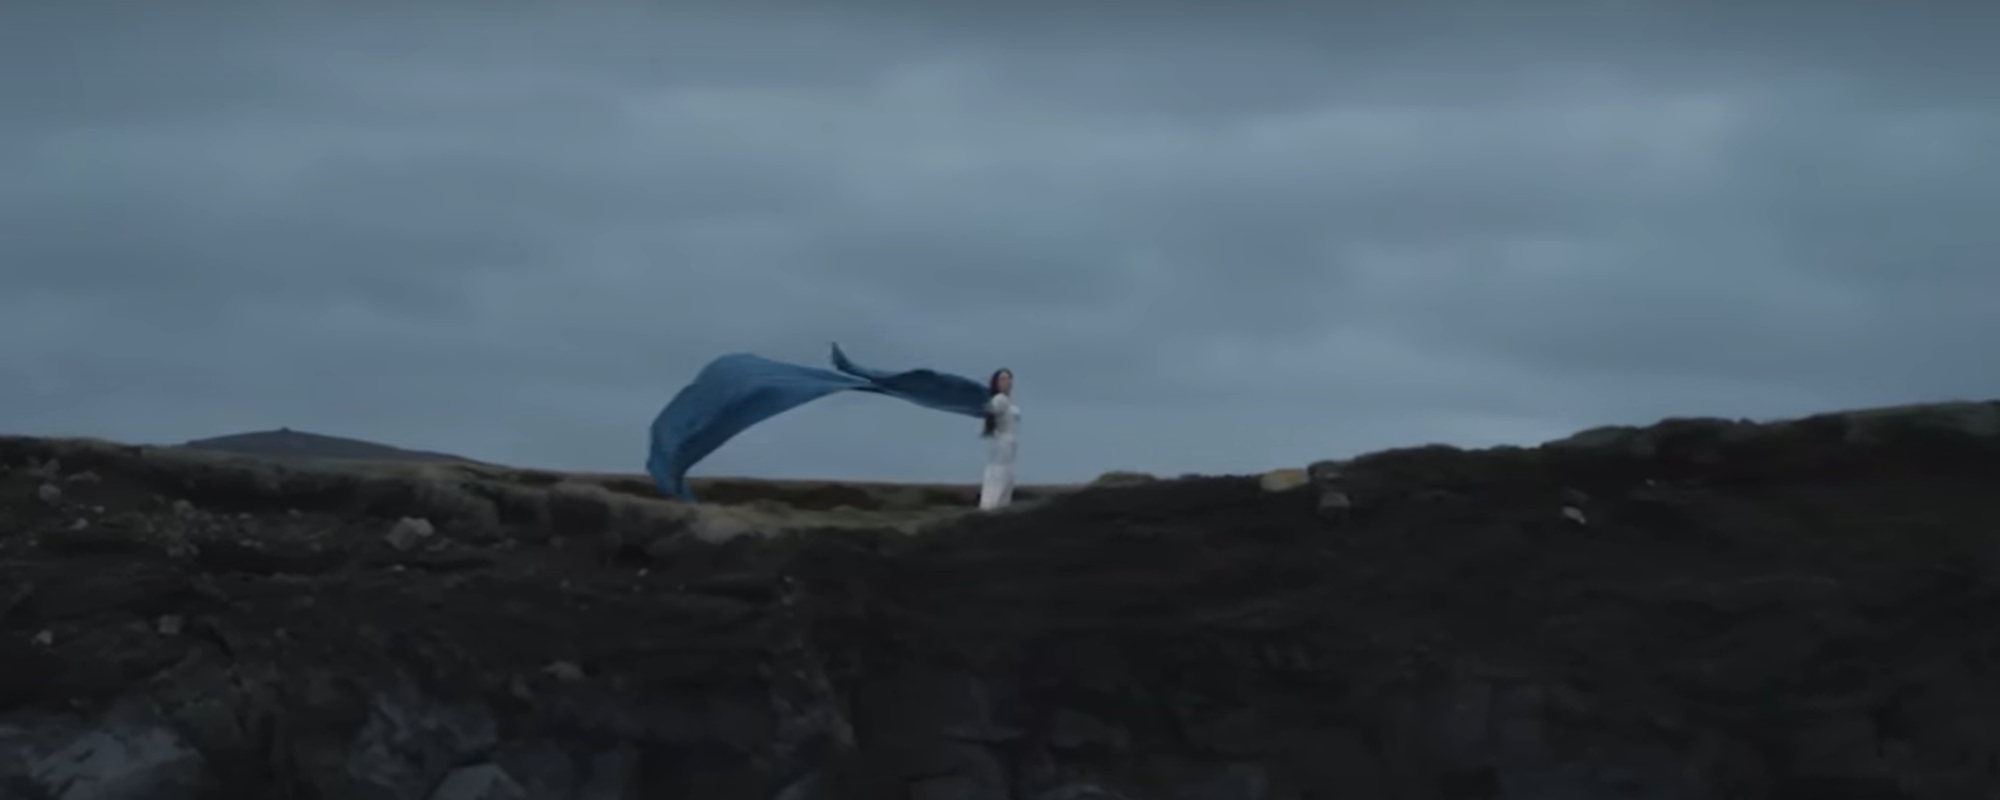 Kacey Musgraves Nearly Falls Off a Cliff While Shooting “Deeper Well” Music Video